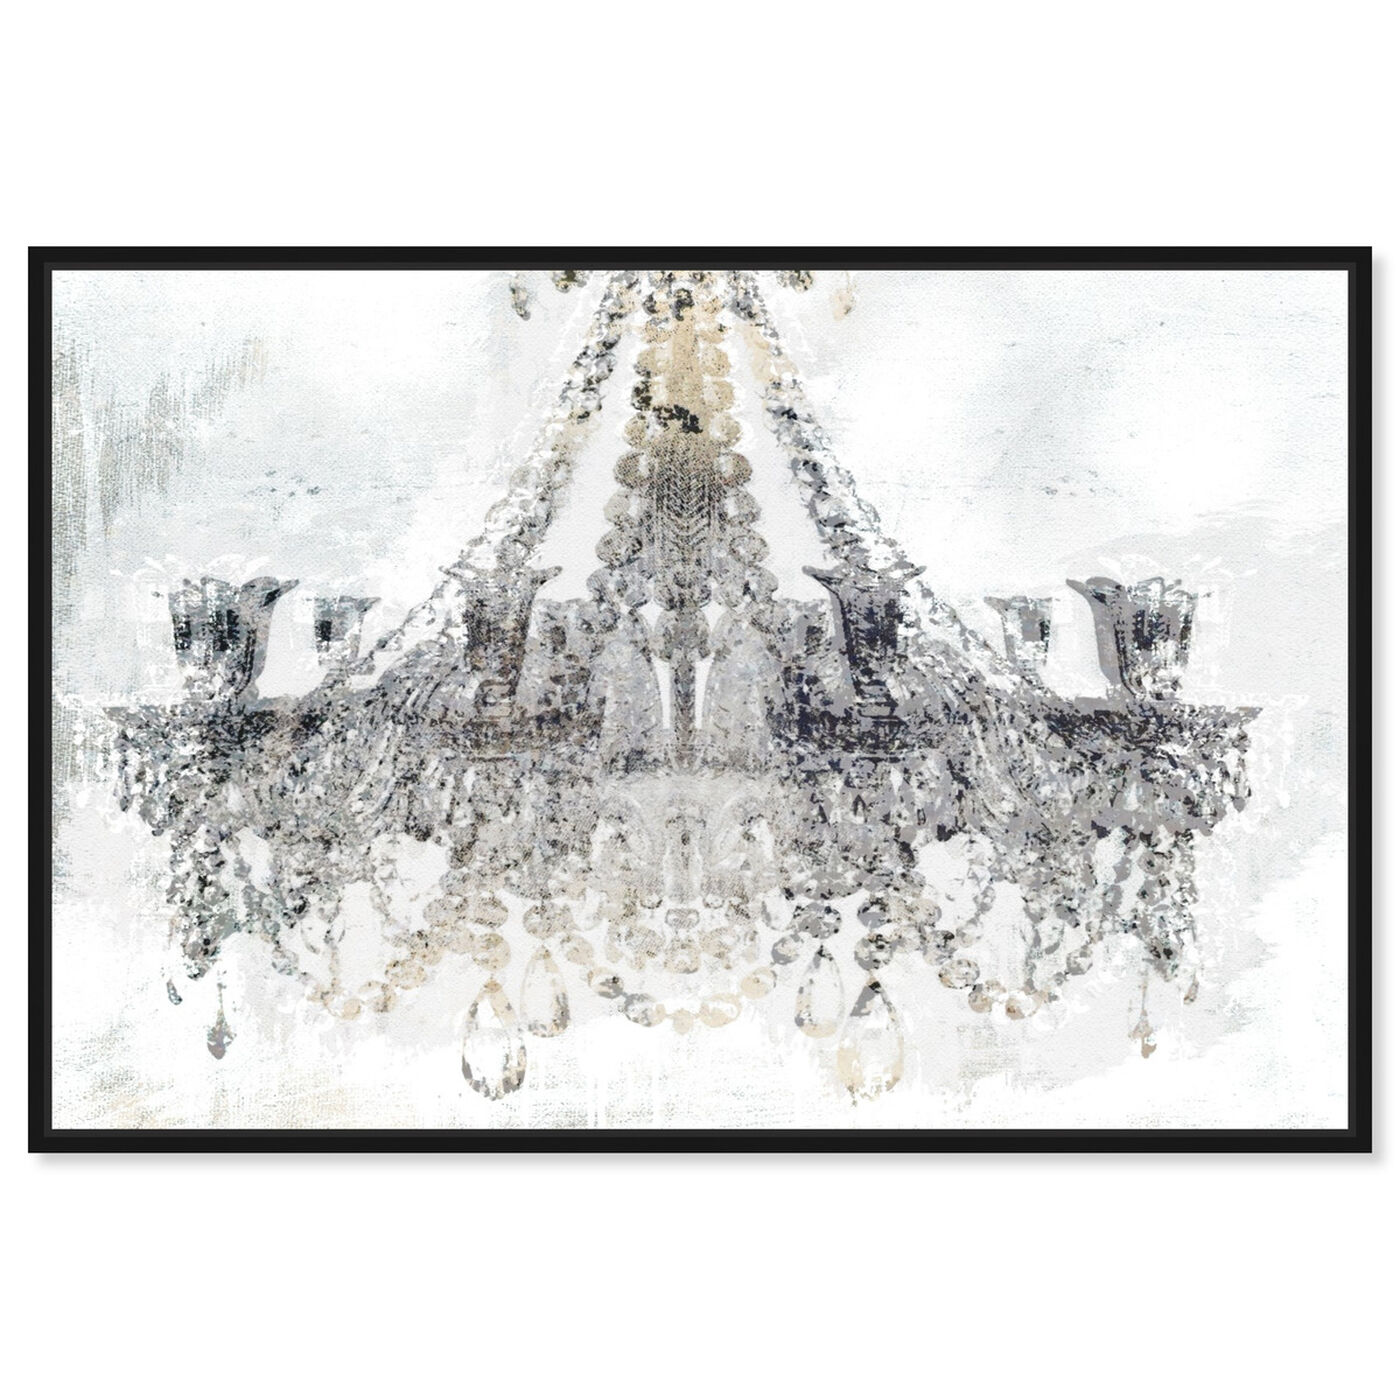 Front view of White Gold Diamonds featuring fashion and glam and chandeliers art.